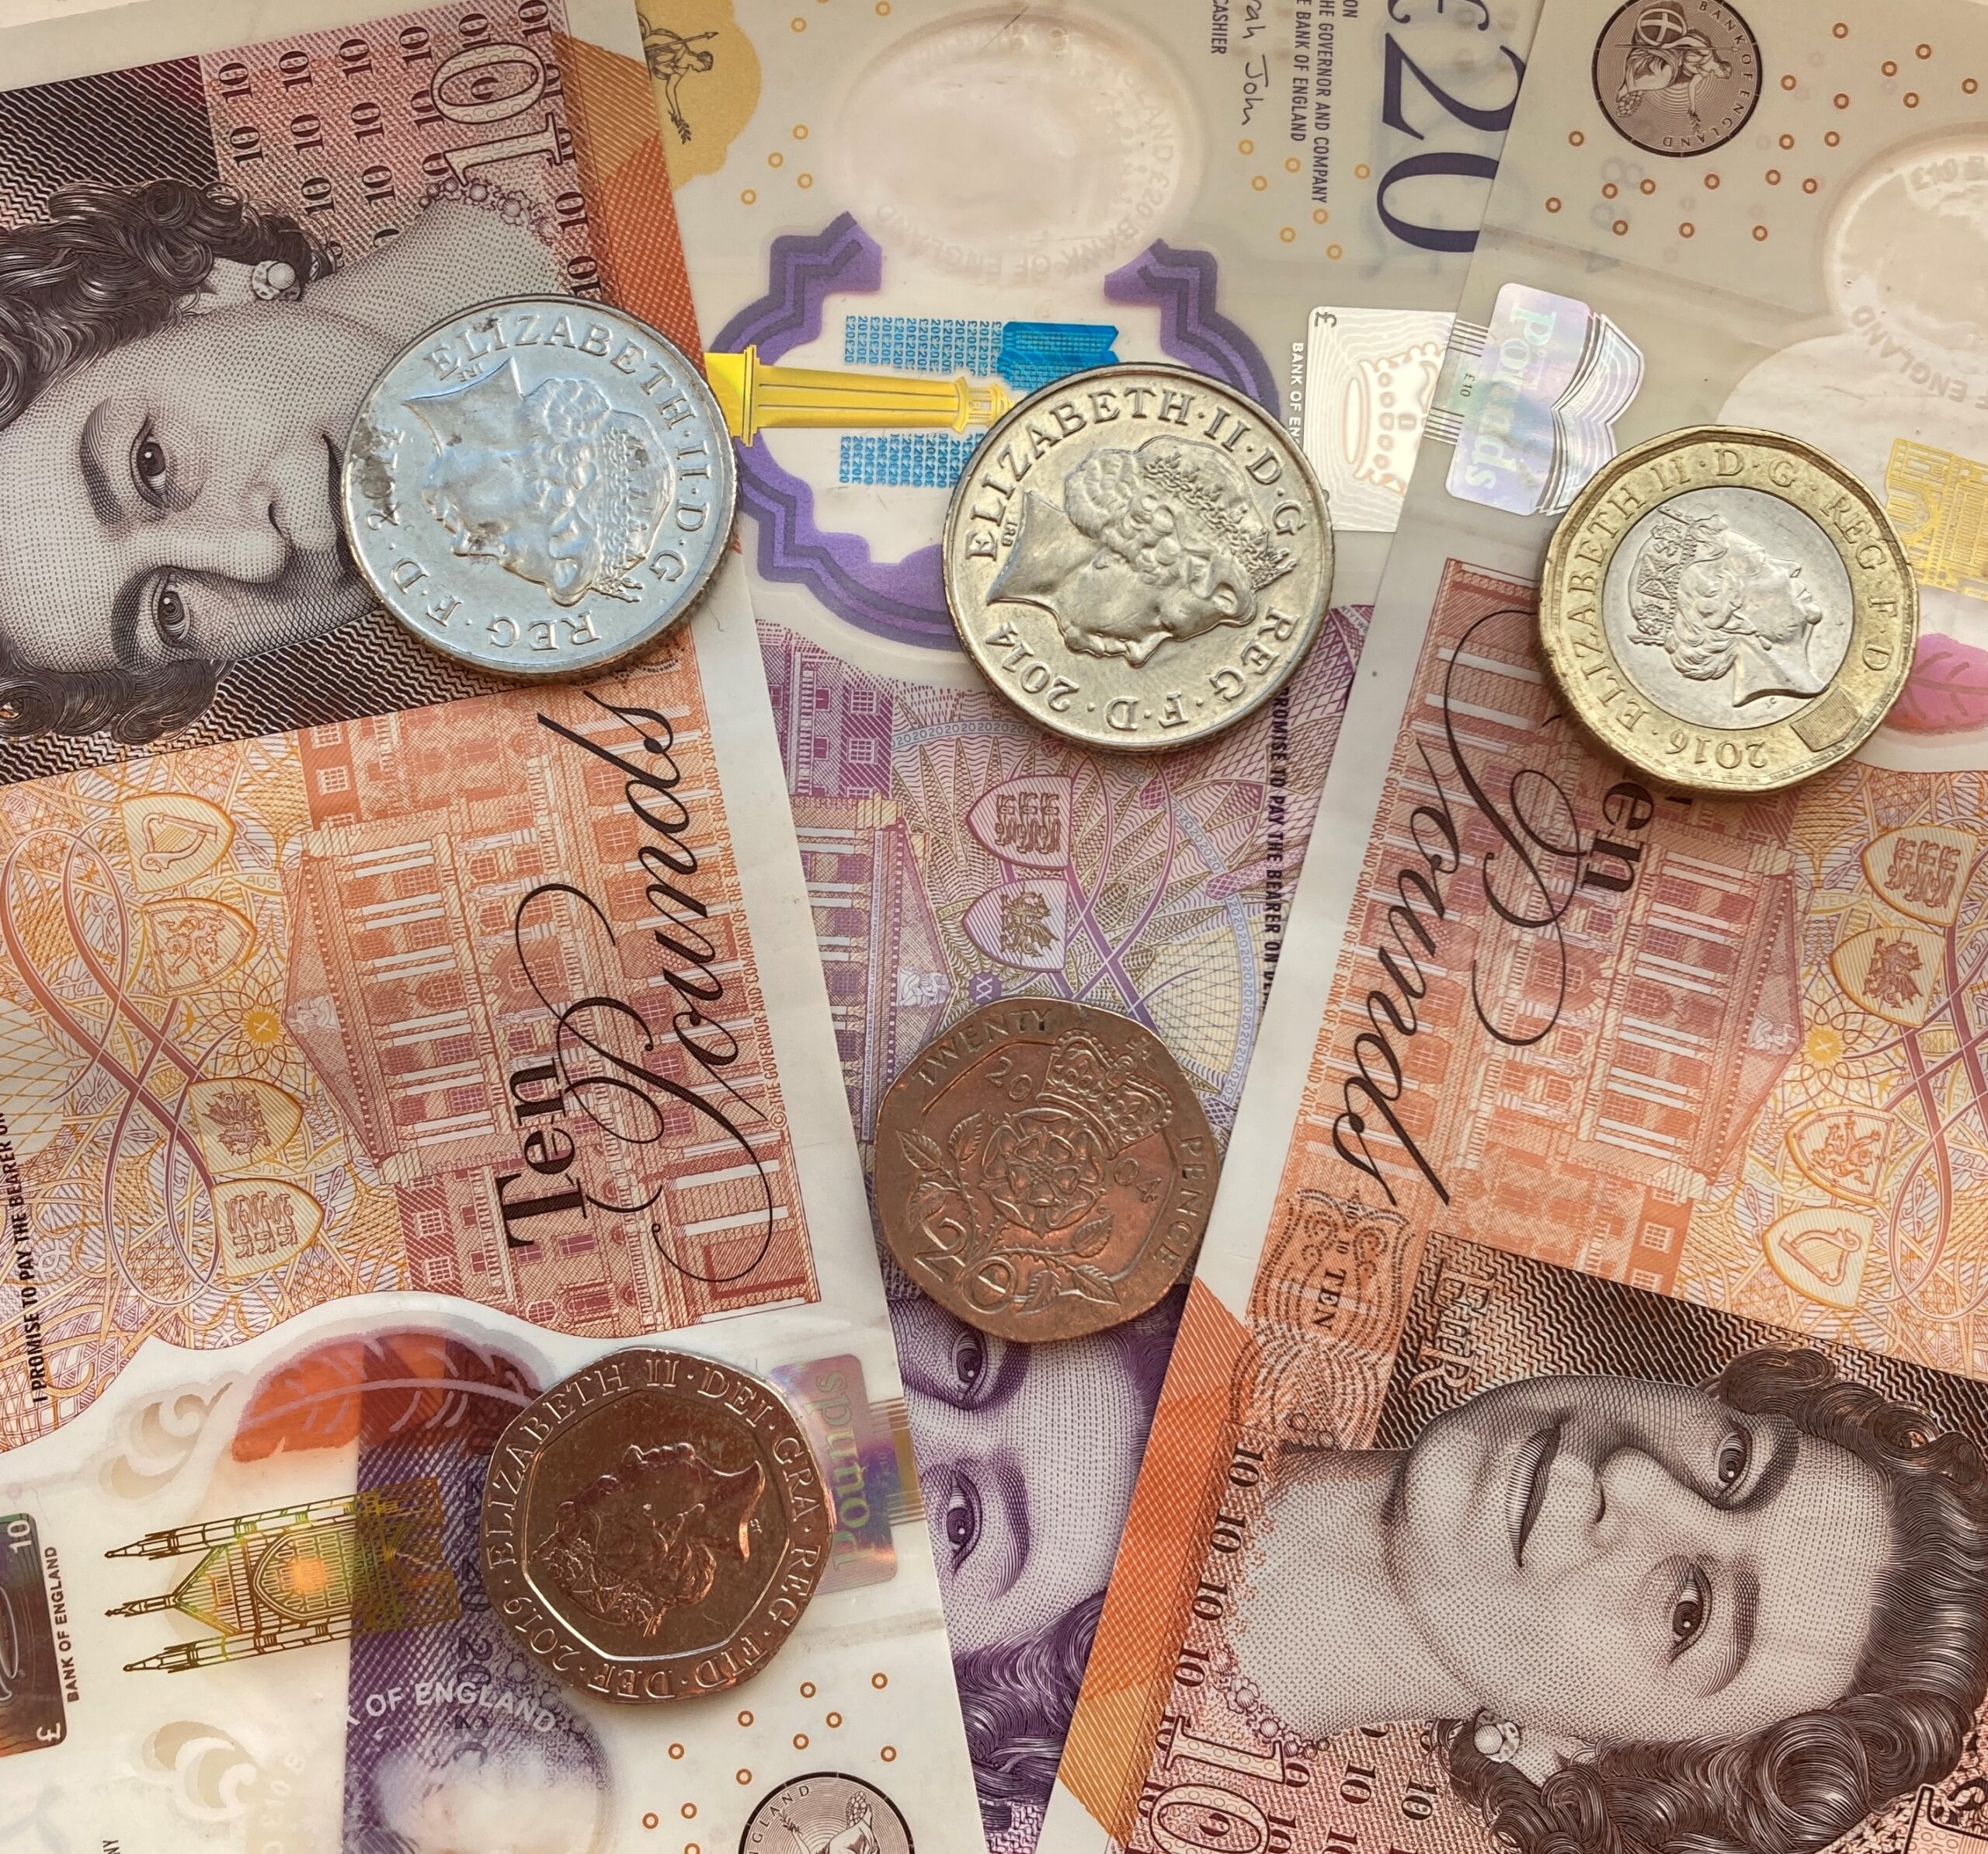 Councillors in Gwent to receive £800 pay-rise from April